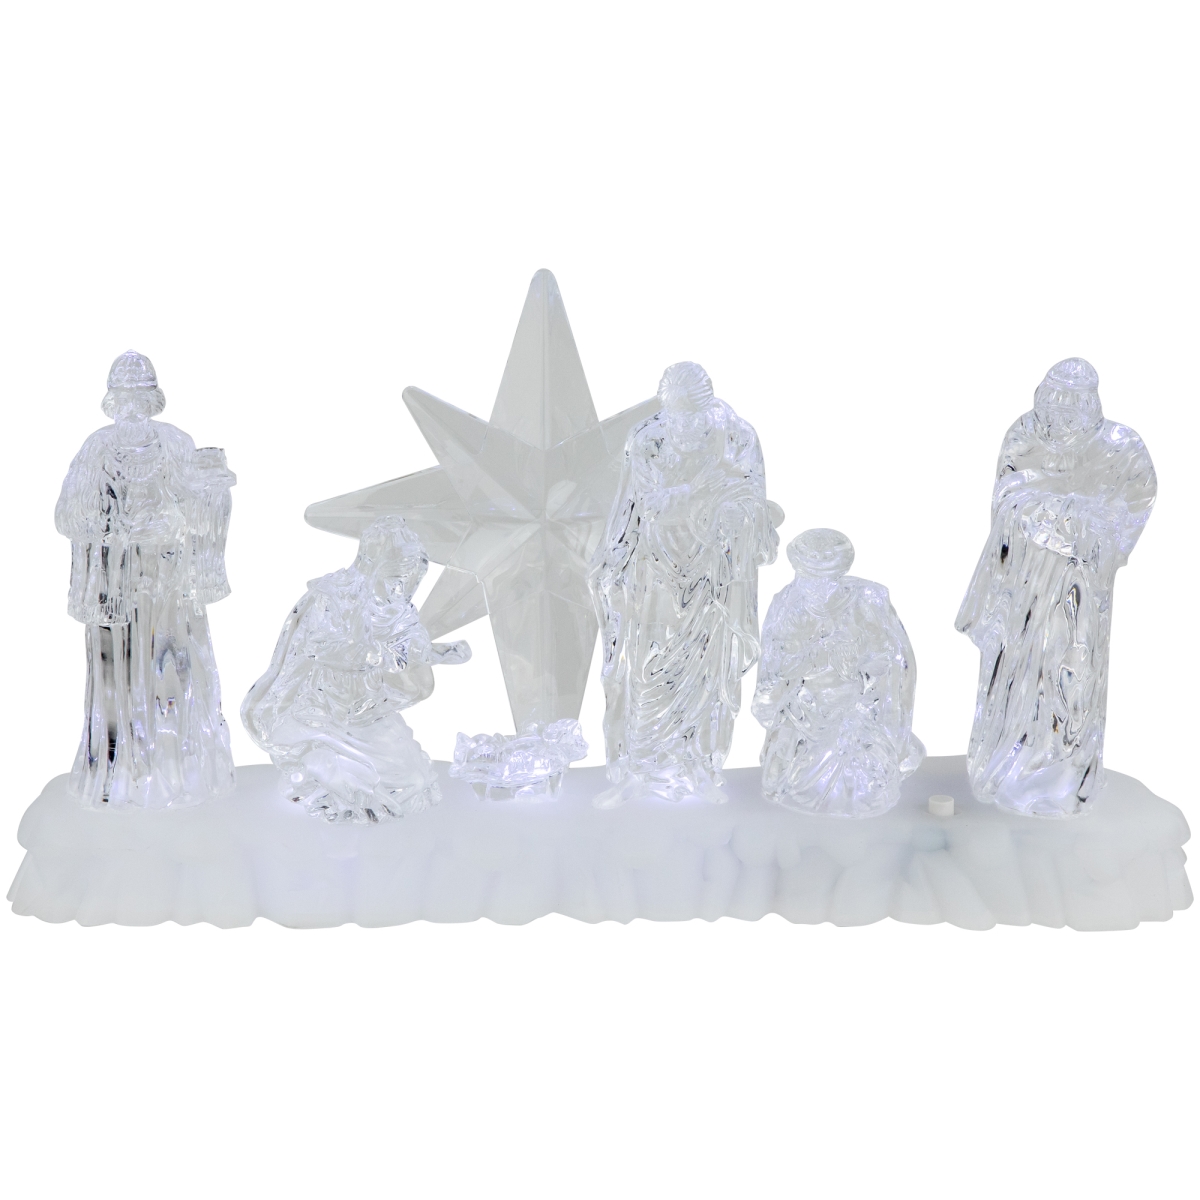 Picture of Northlight 35690053 12.25 in. LED Lighted Nativity Scene Acrylic Christmas Decoration